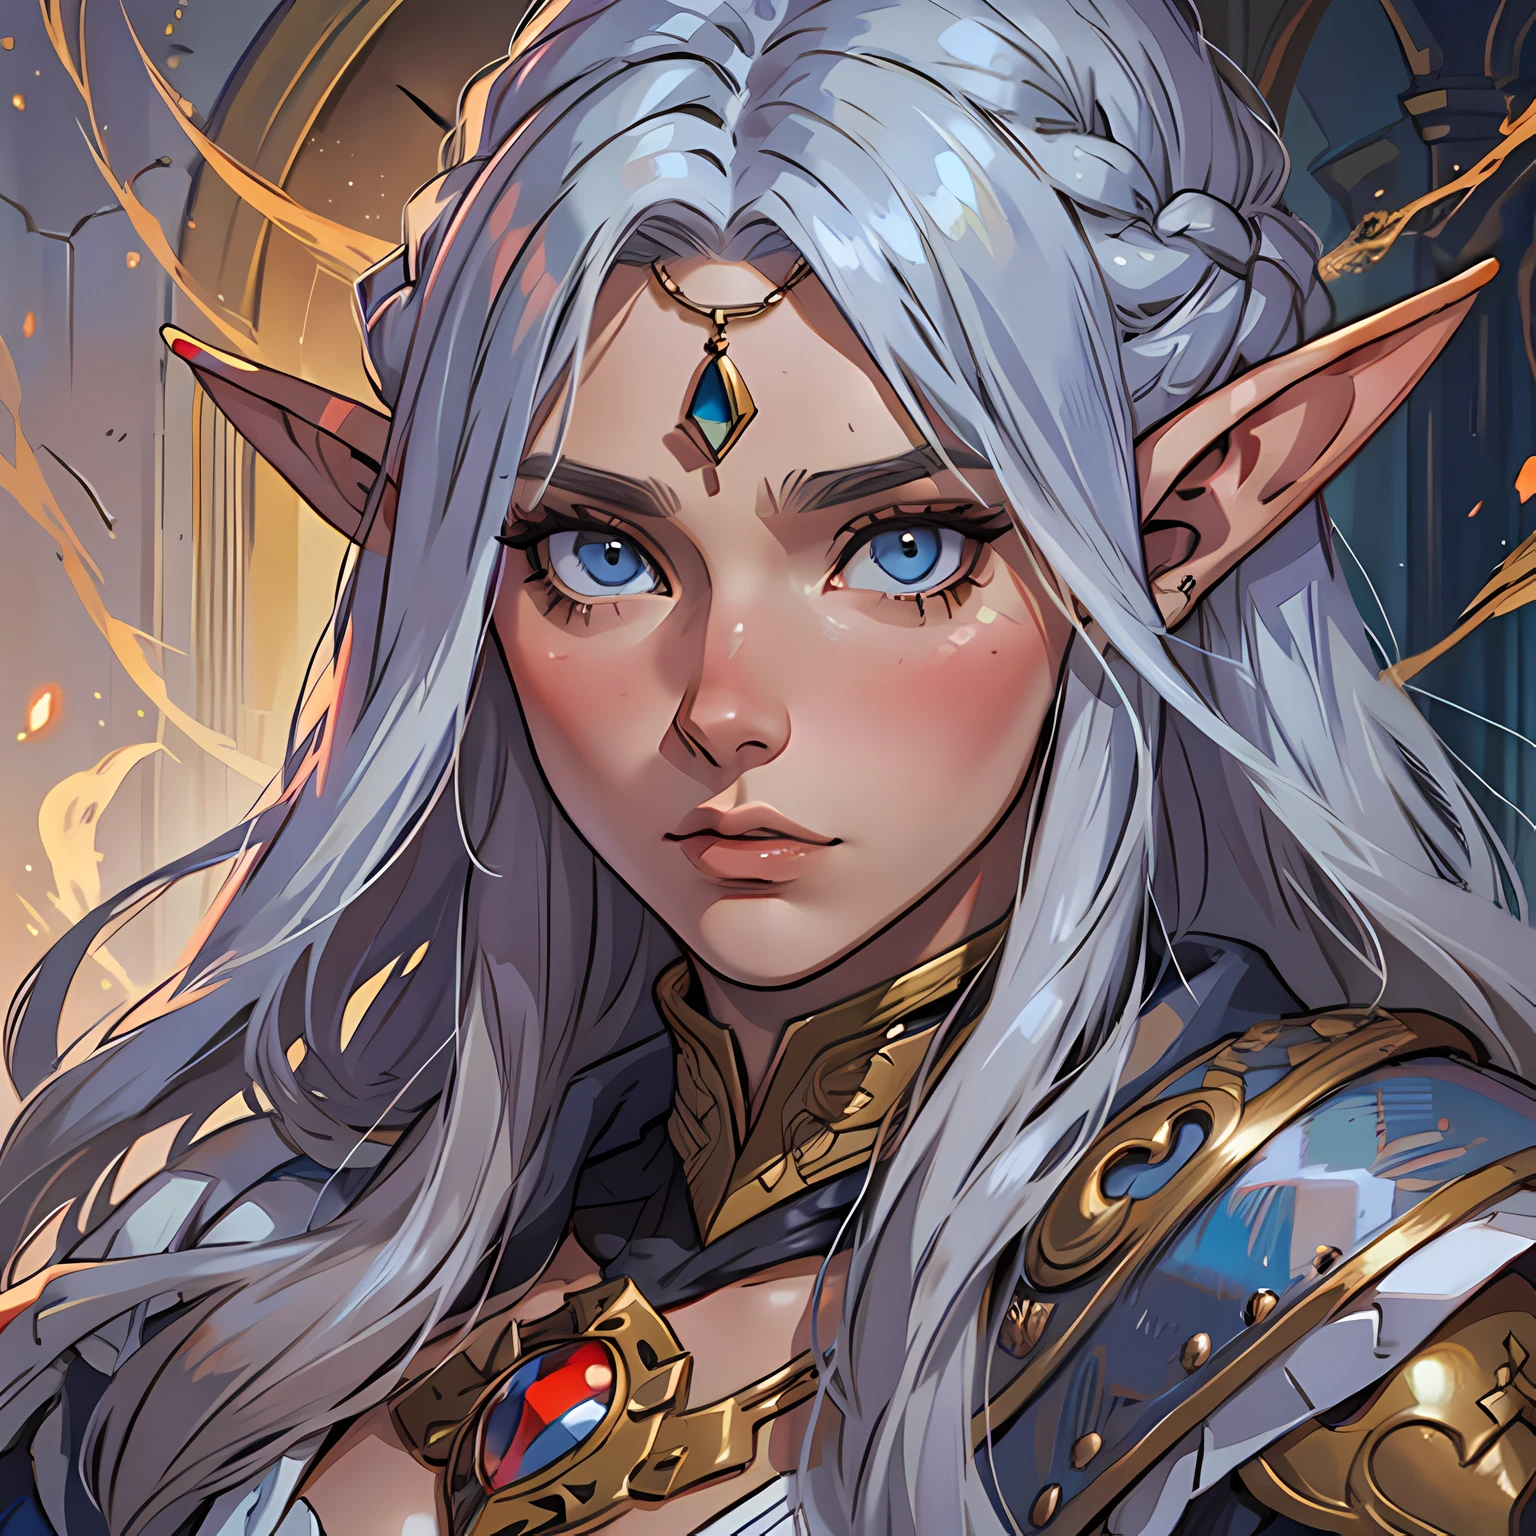 Retracted RPG, foreground, Fantasyart, Raza: Eleven genus: female, AGE: 60 years Eyes: Blue Skin color: Fair skin with warm tones Physique: thesis normal. facial features: Skin with wrinkles. expression: relaxed look. hairstyle: Gray hair equipment: Wizard Clothing Background: library